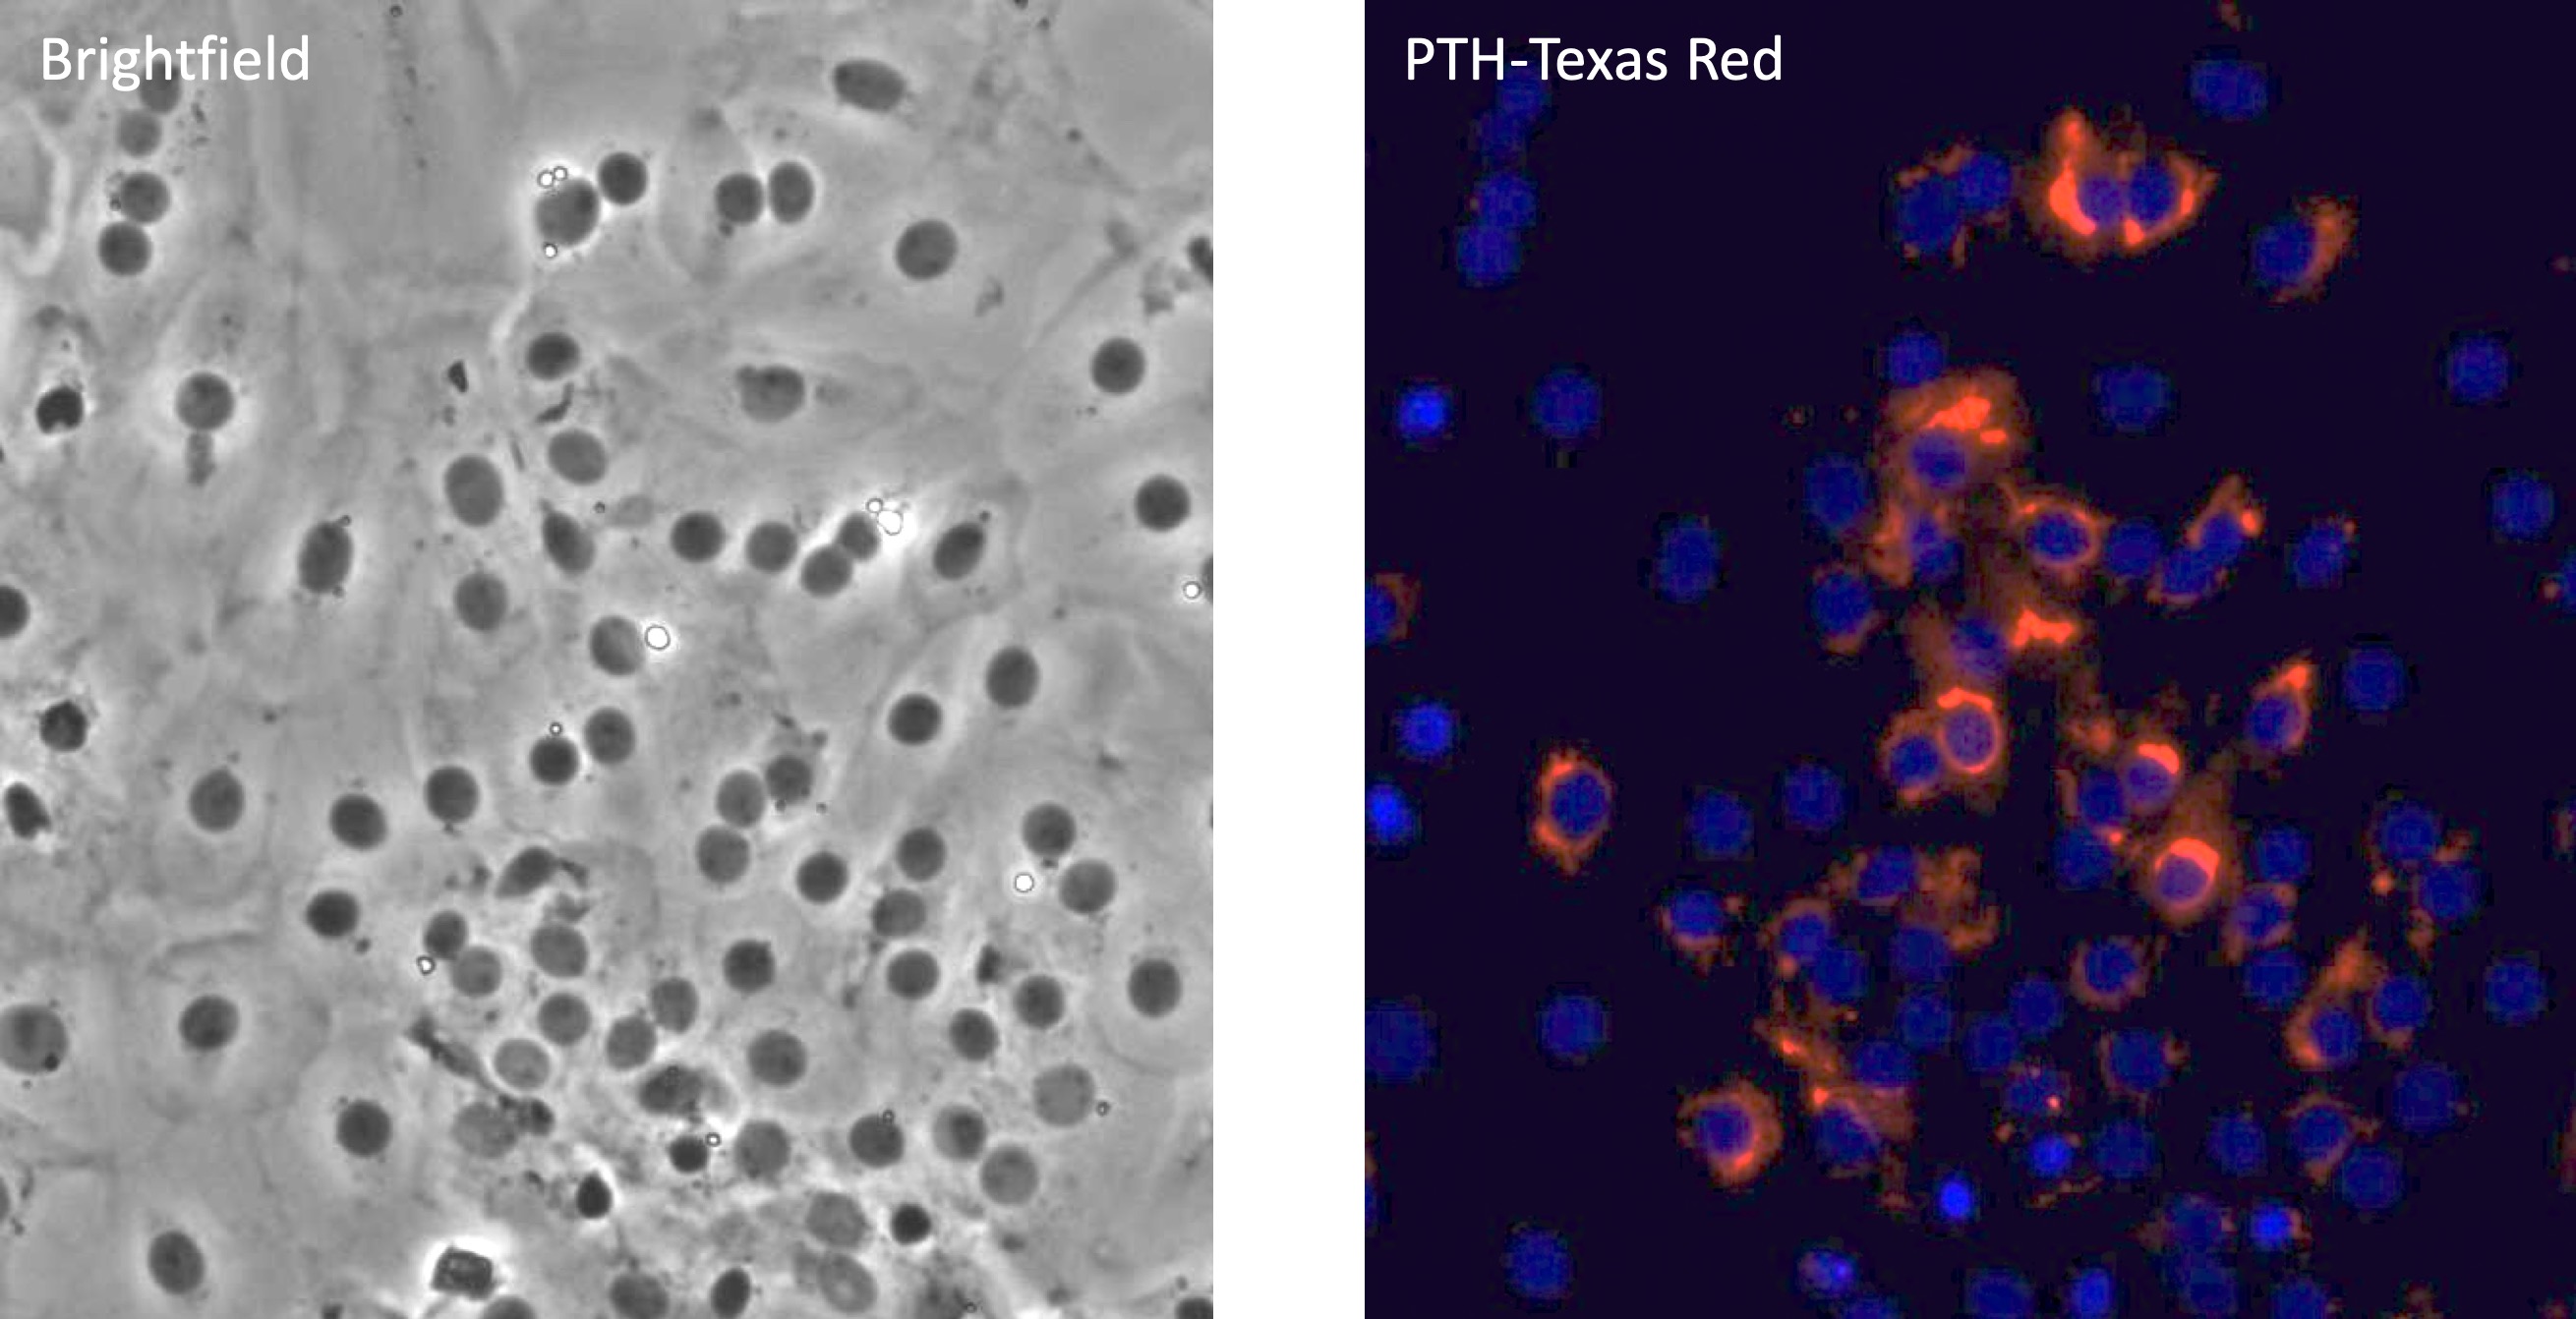 Staining of primary parathyroid cells after 4 hours of low calcium stimulation. Same field is shown on left (brightfield) and right (immunofluorescence for PTH in red, DAPI in blue). Images by Betty R. Lawton Ph.D.